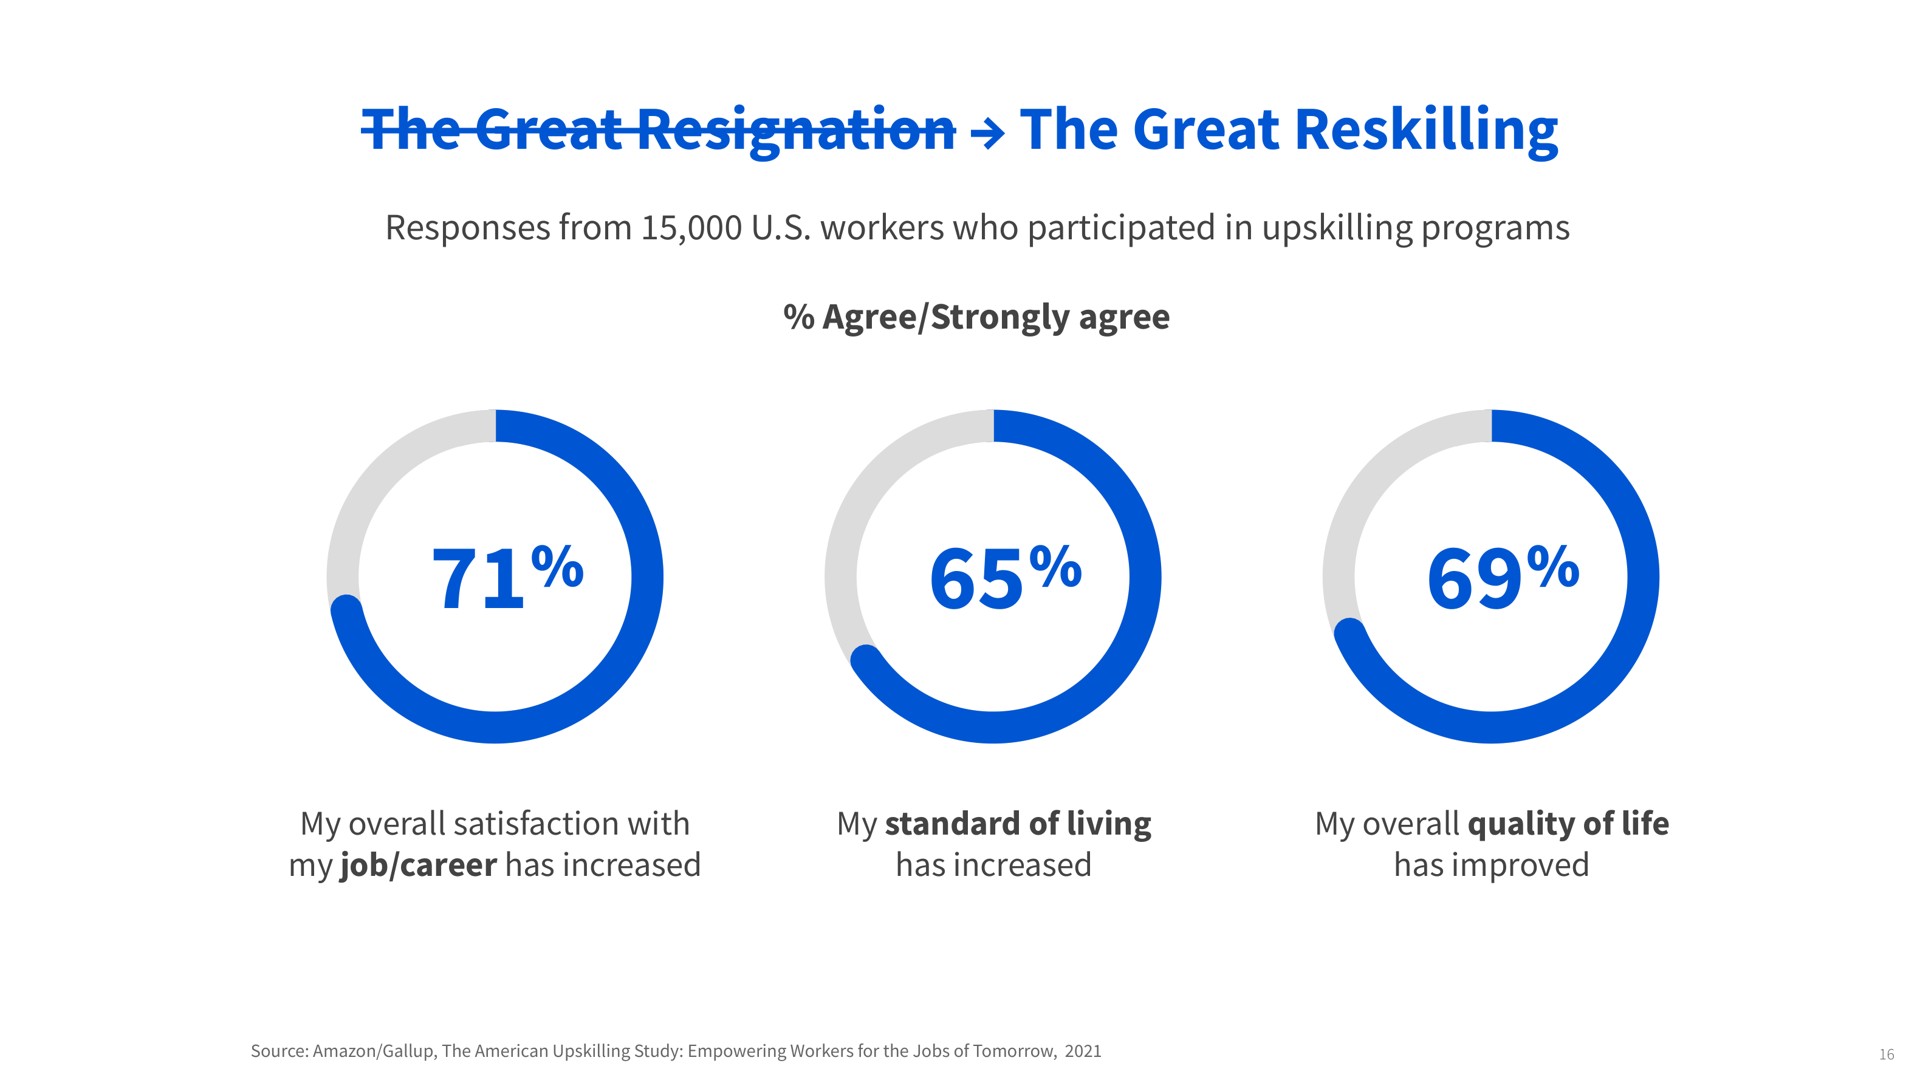 the great resignation the great responses from workers who participated in programs agree strongly agree my overall satisfaction with my job career has increased my standard of living has increased my overall quality of life has improved great | Coursera